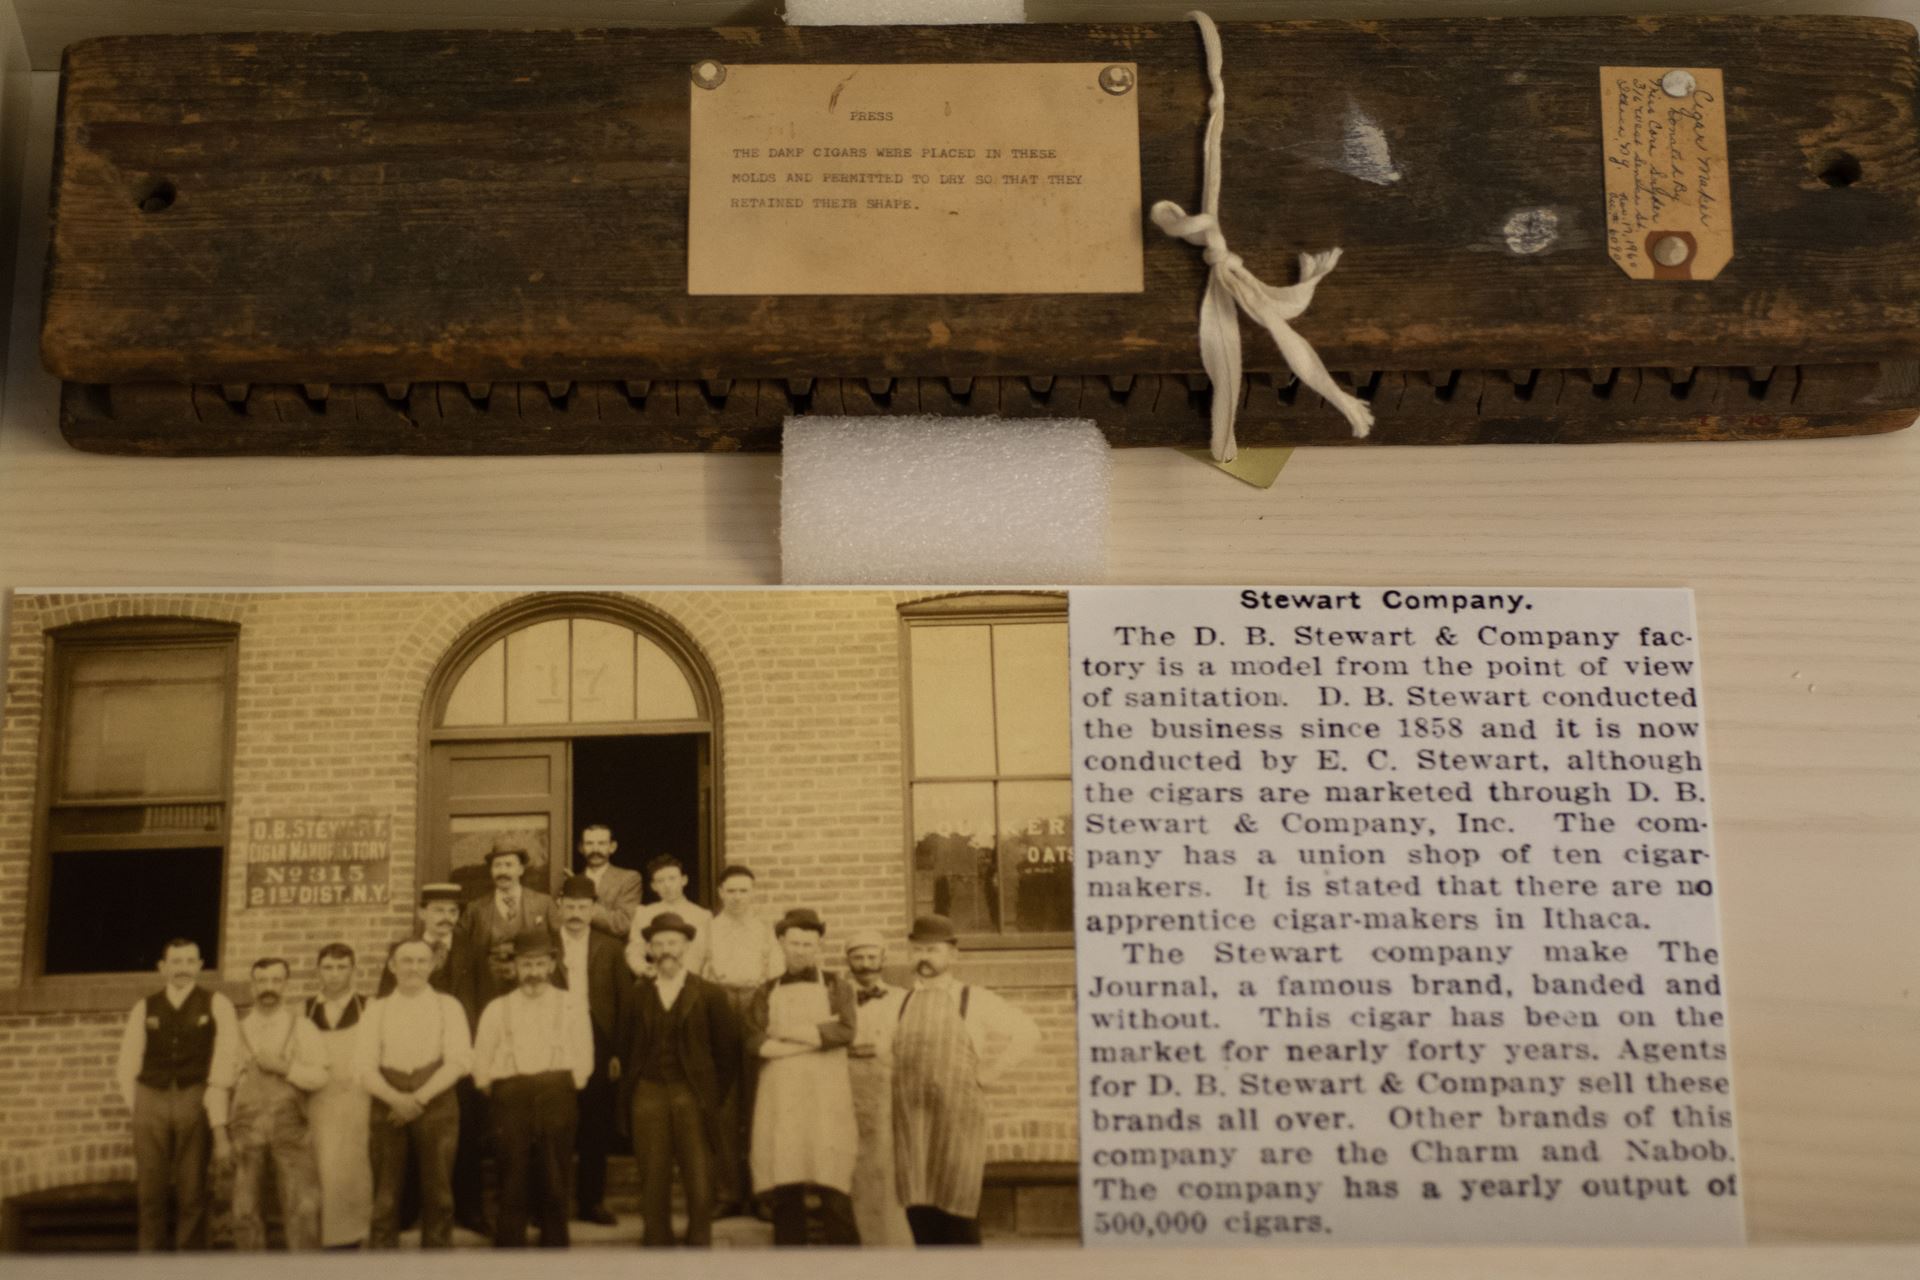 A small rectangular image of a historical photo labelled "Stewart Company" next to a description of the history of the Stewart Company.